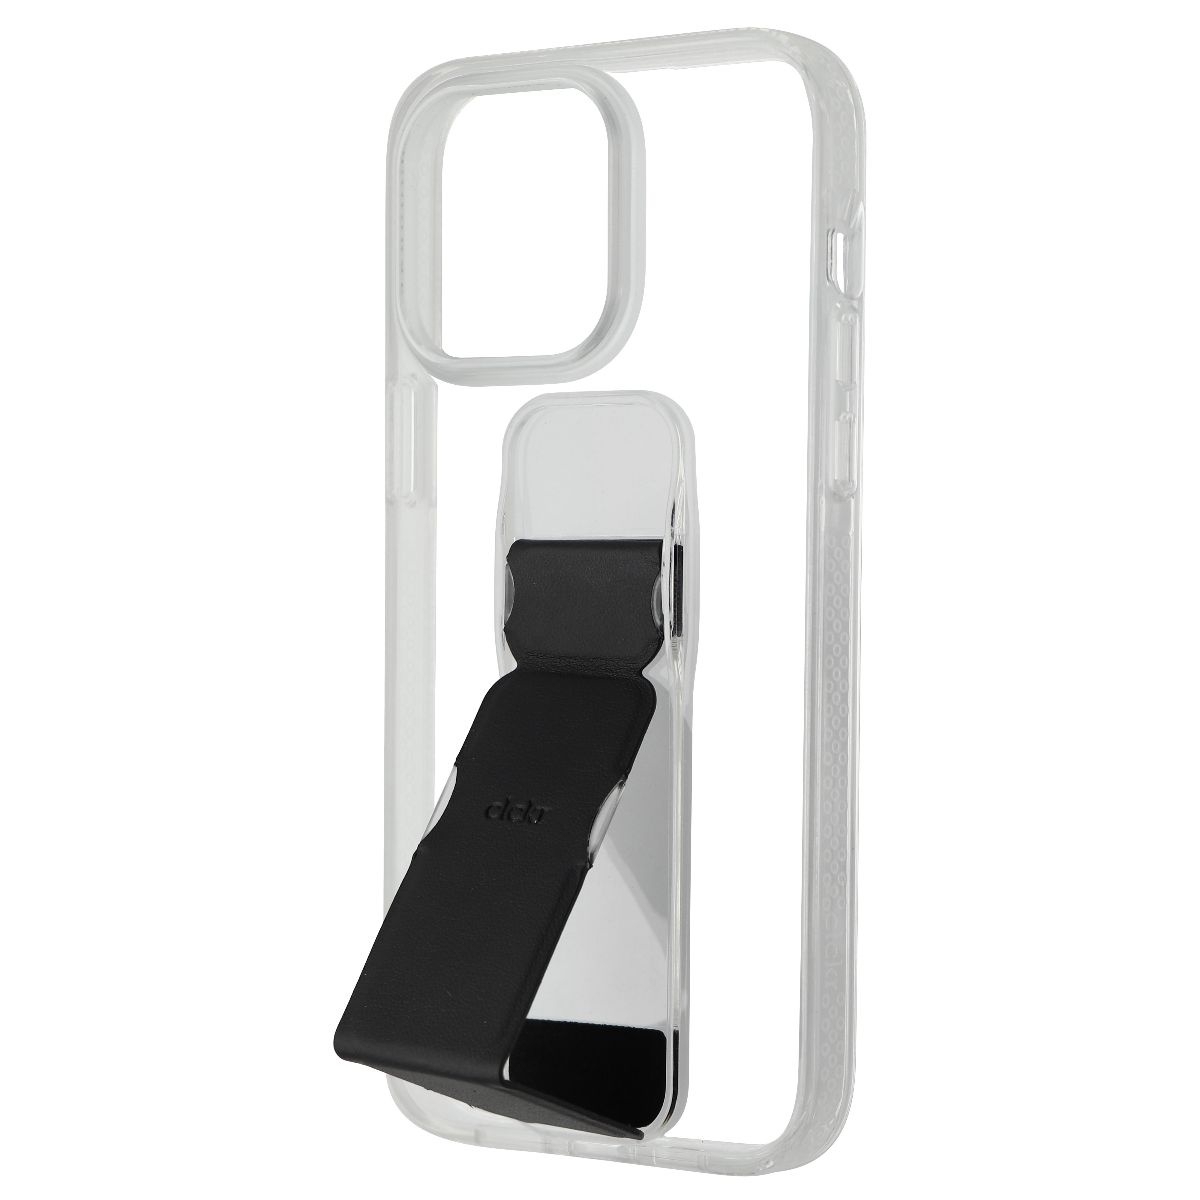 CLCKR Stand & Grip Case For IPhone 14 Pro Max - Clear/Black